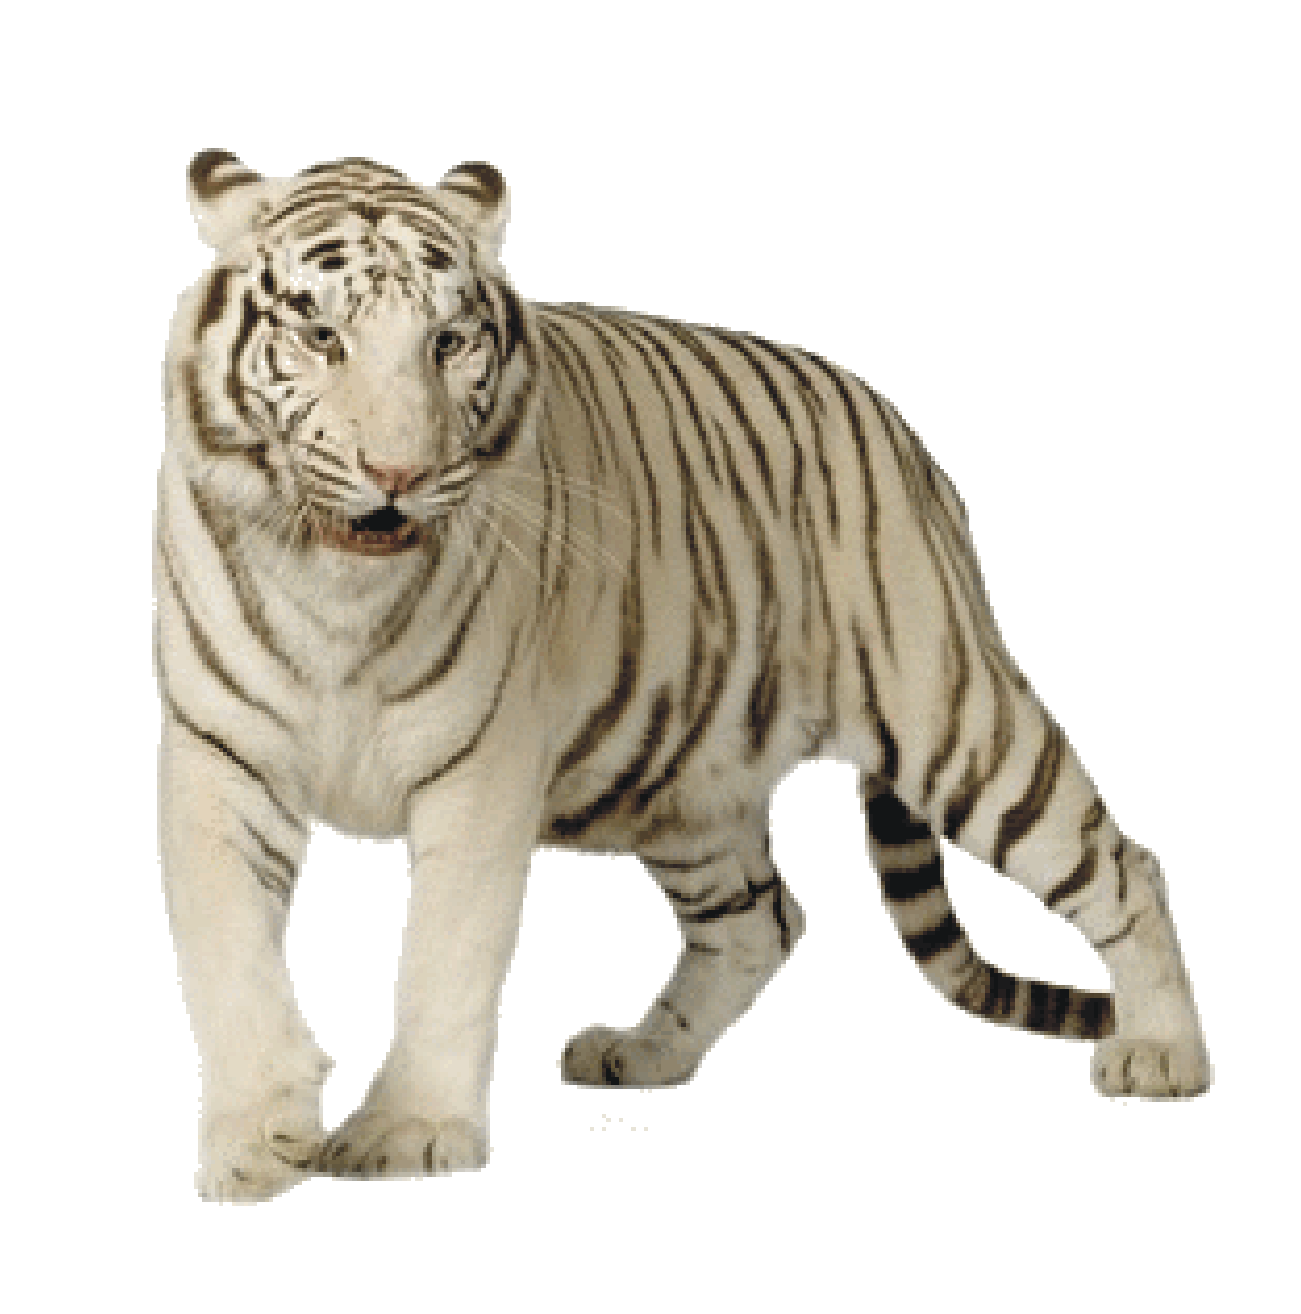 White Tiger PNG Image in High Definition Transparent